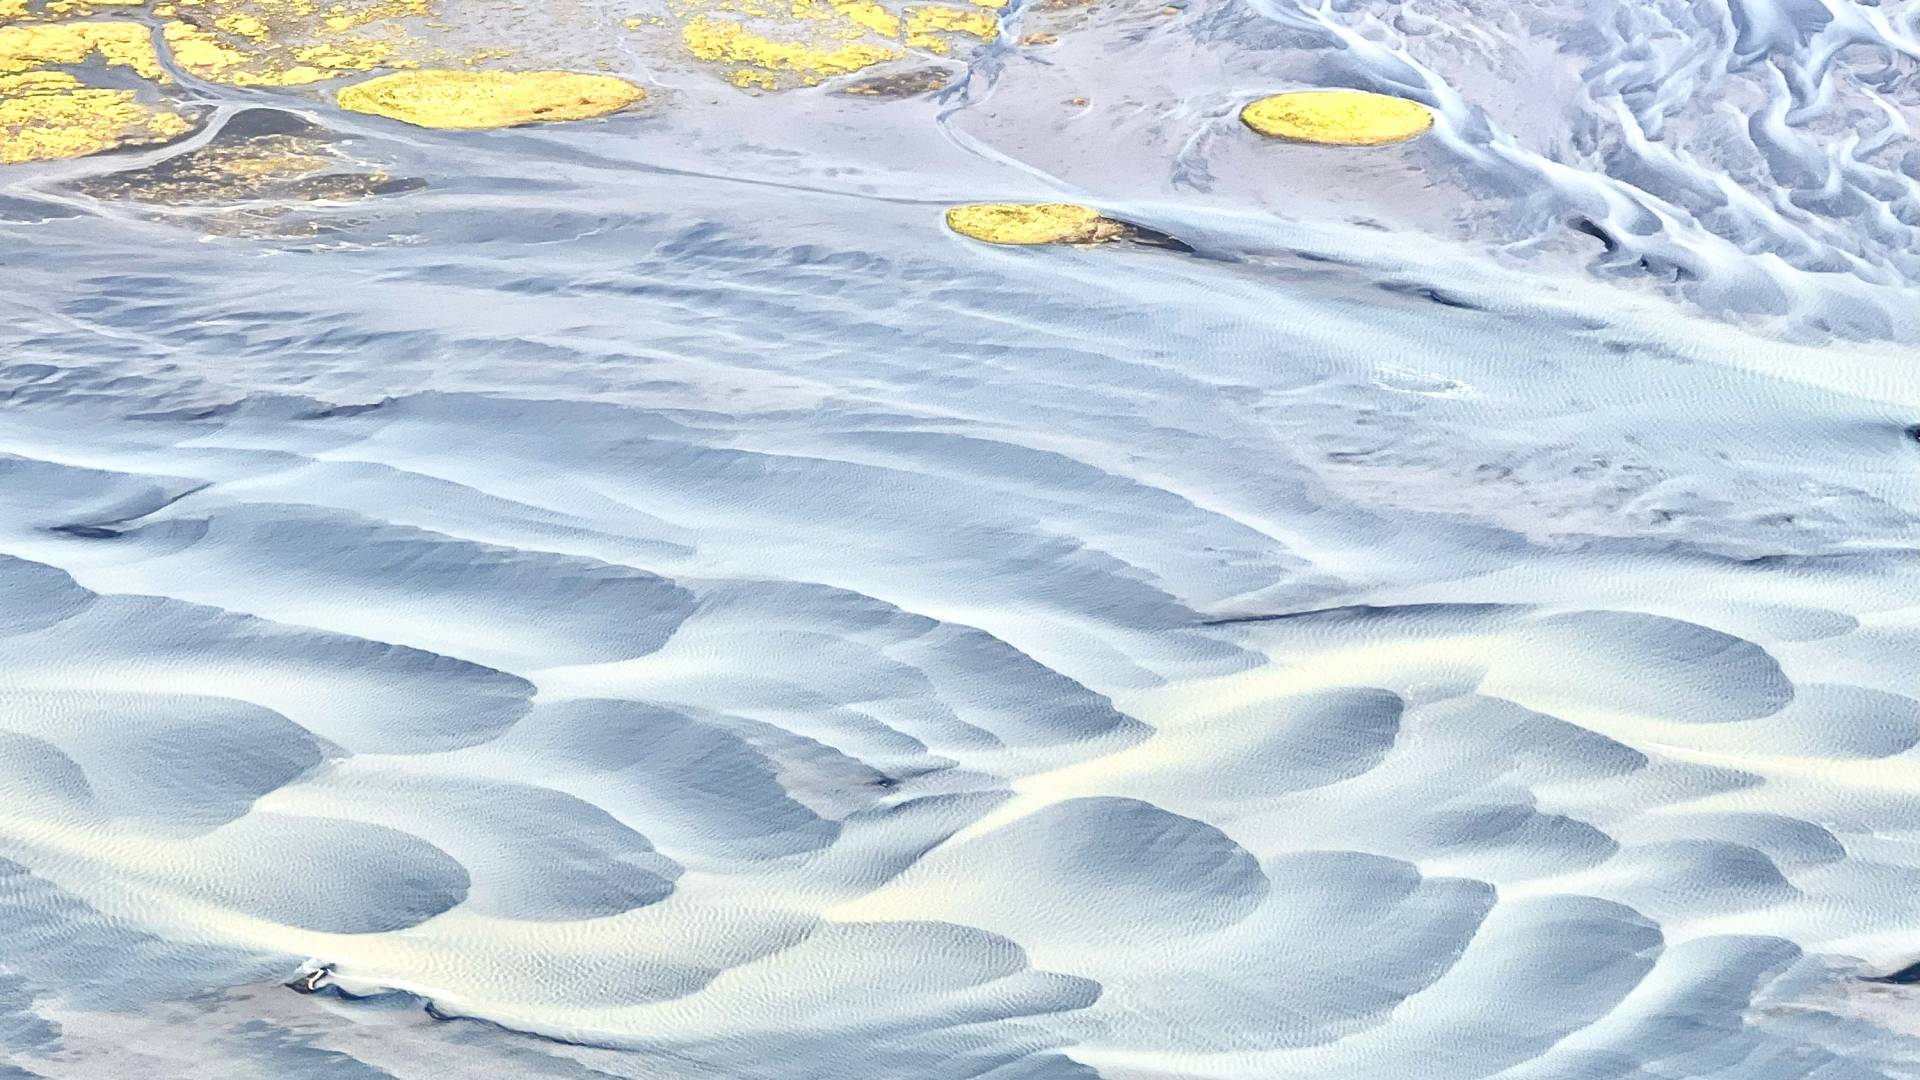 Glacial rivers creating filigree patterns across the delta